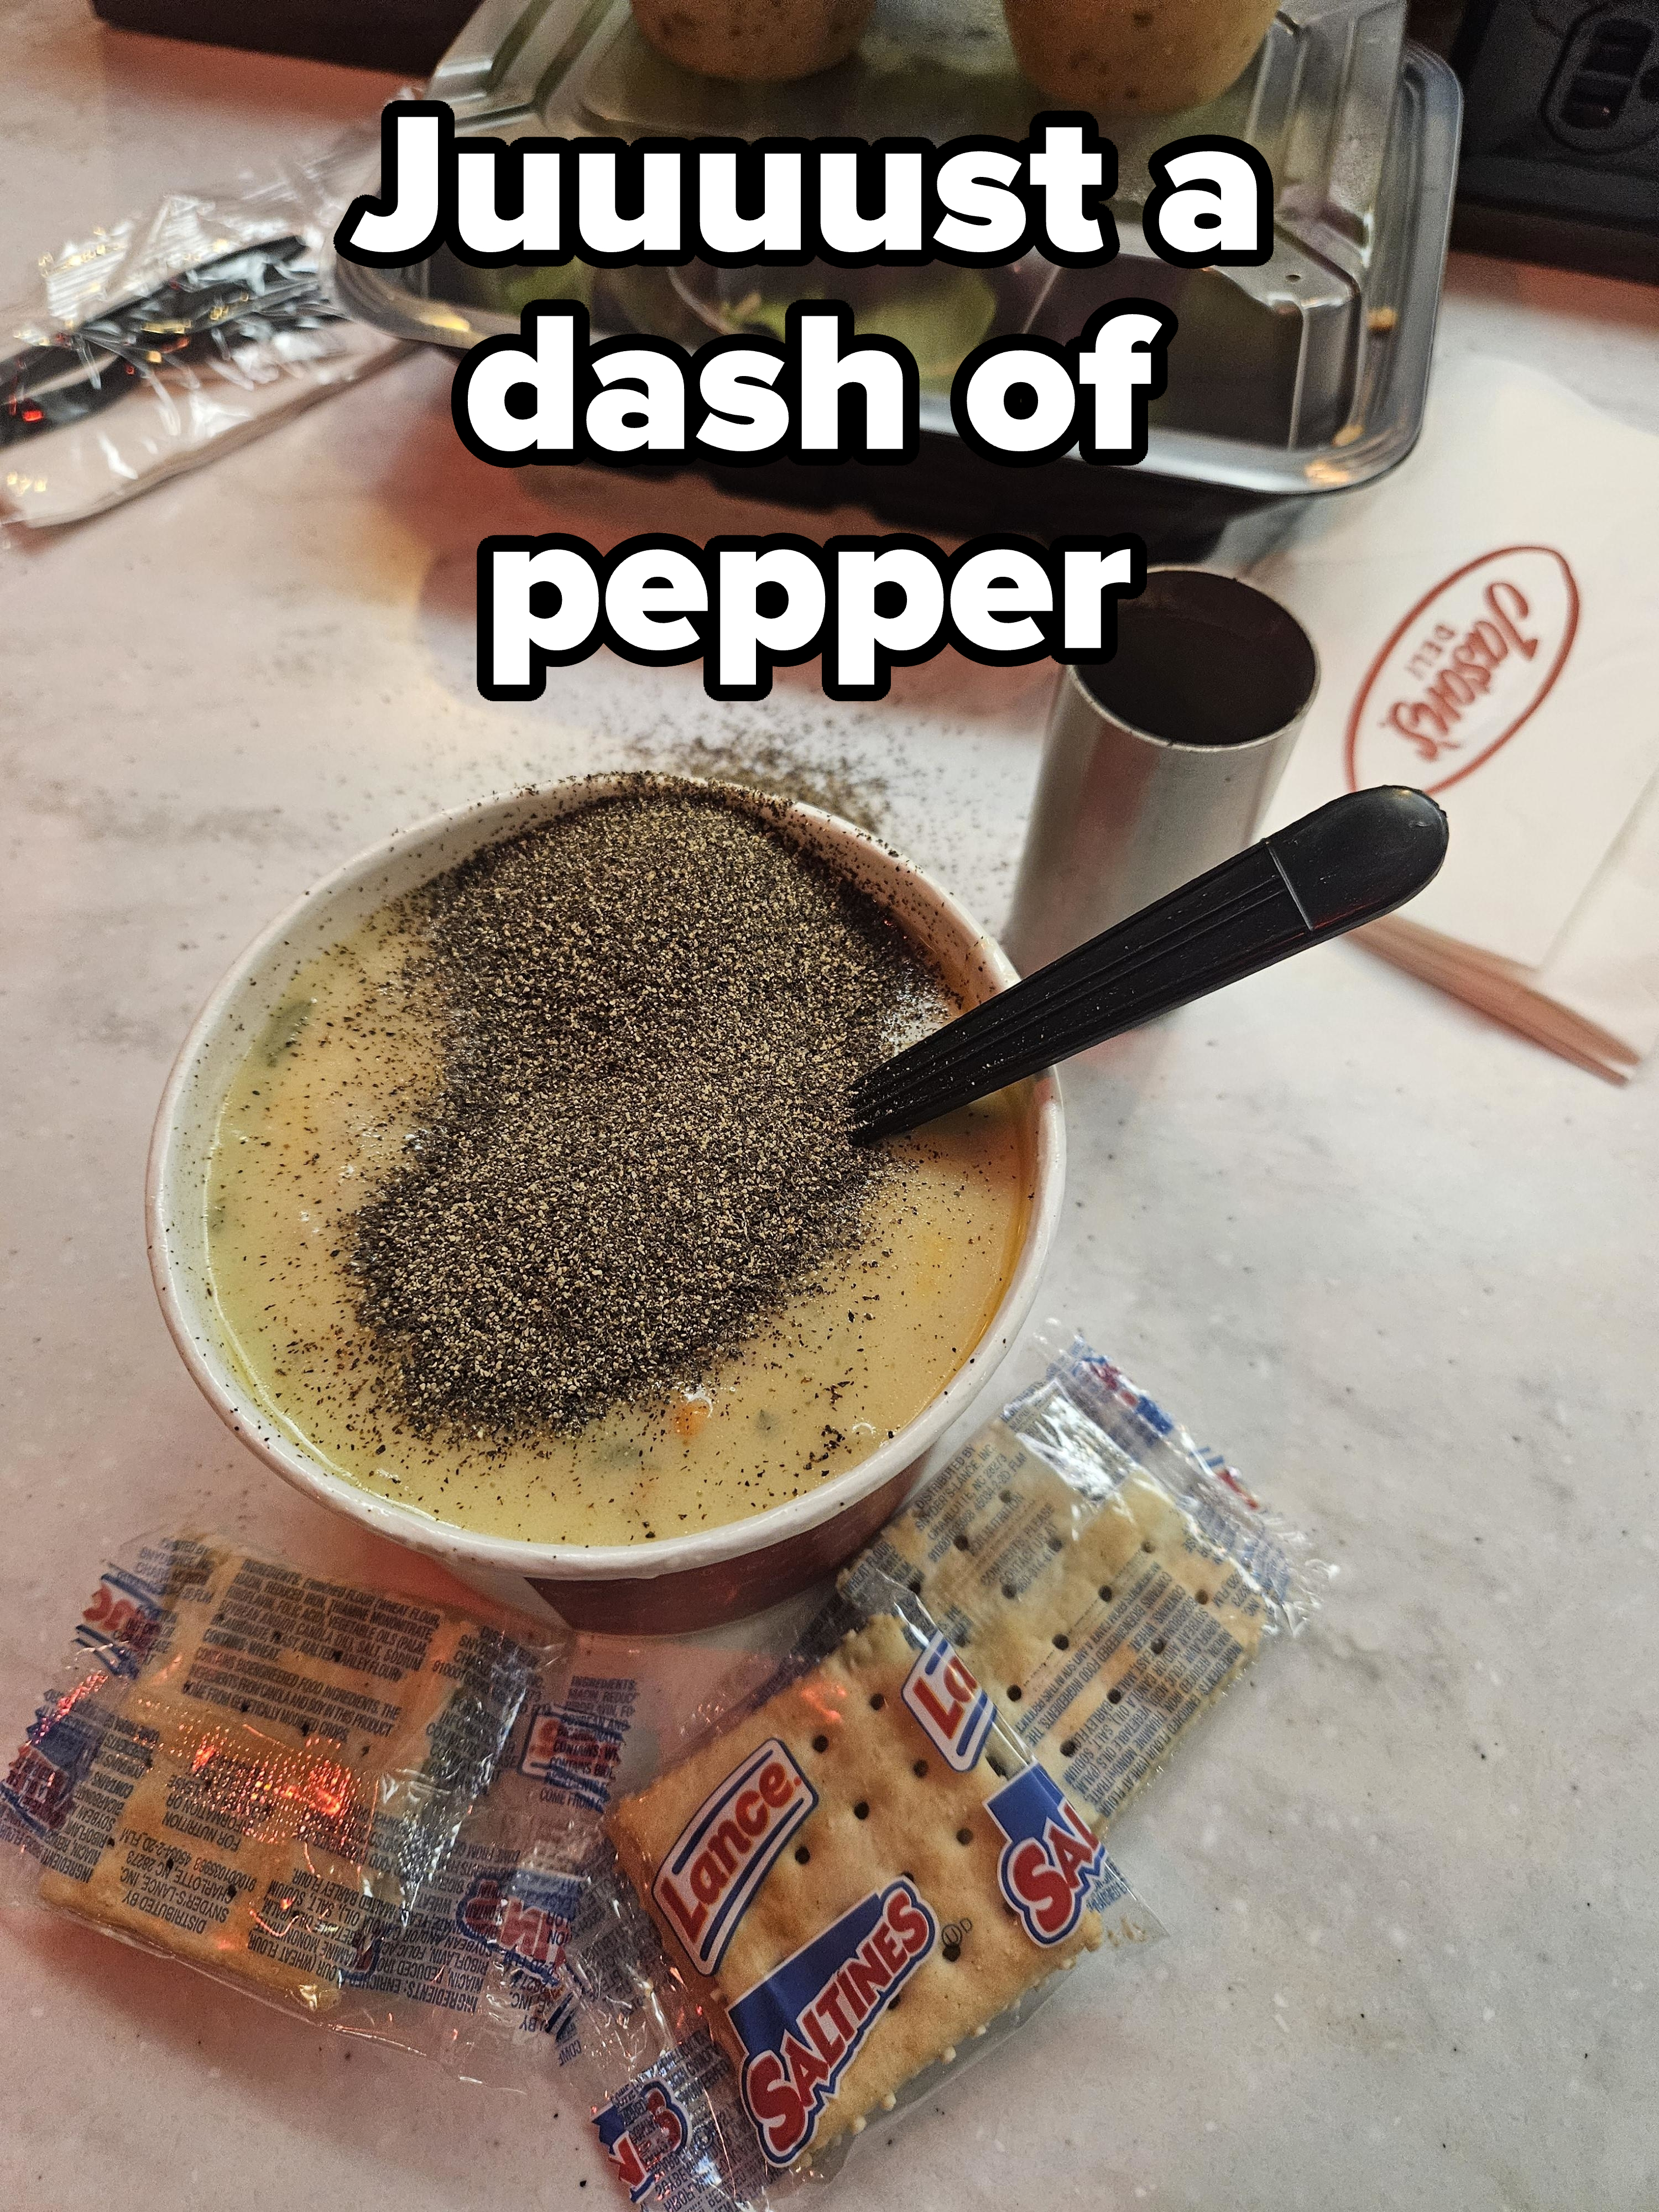 A bowl of soup heavily sprinkled with black pepper, a spoon, and packs of saltine crackers on a marble surface